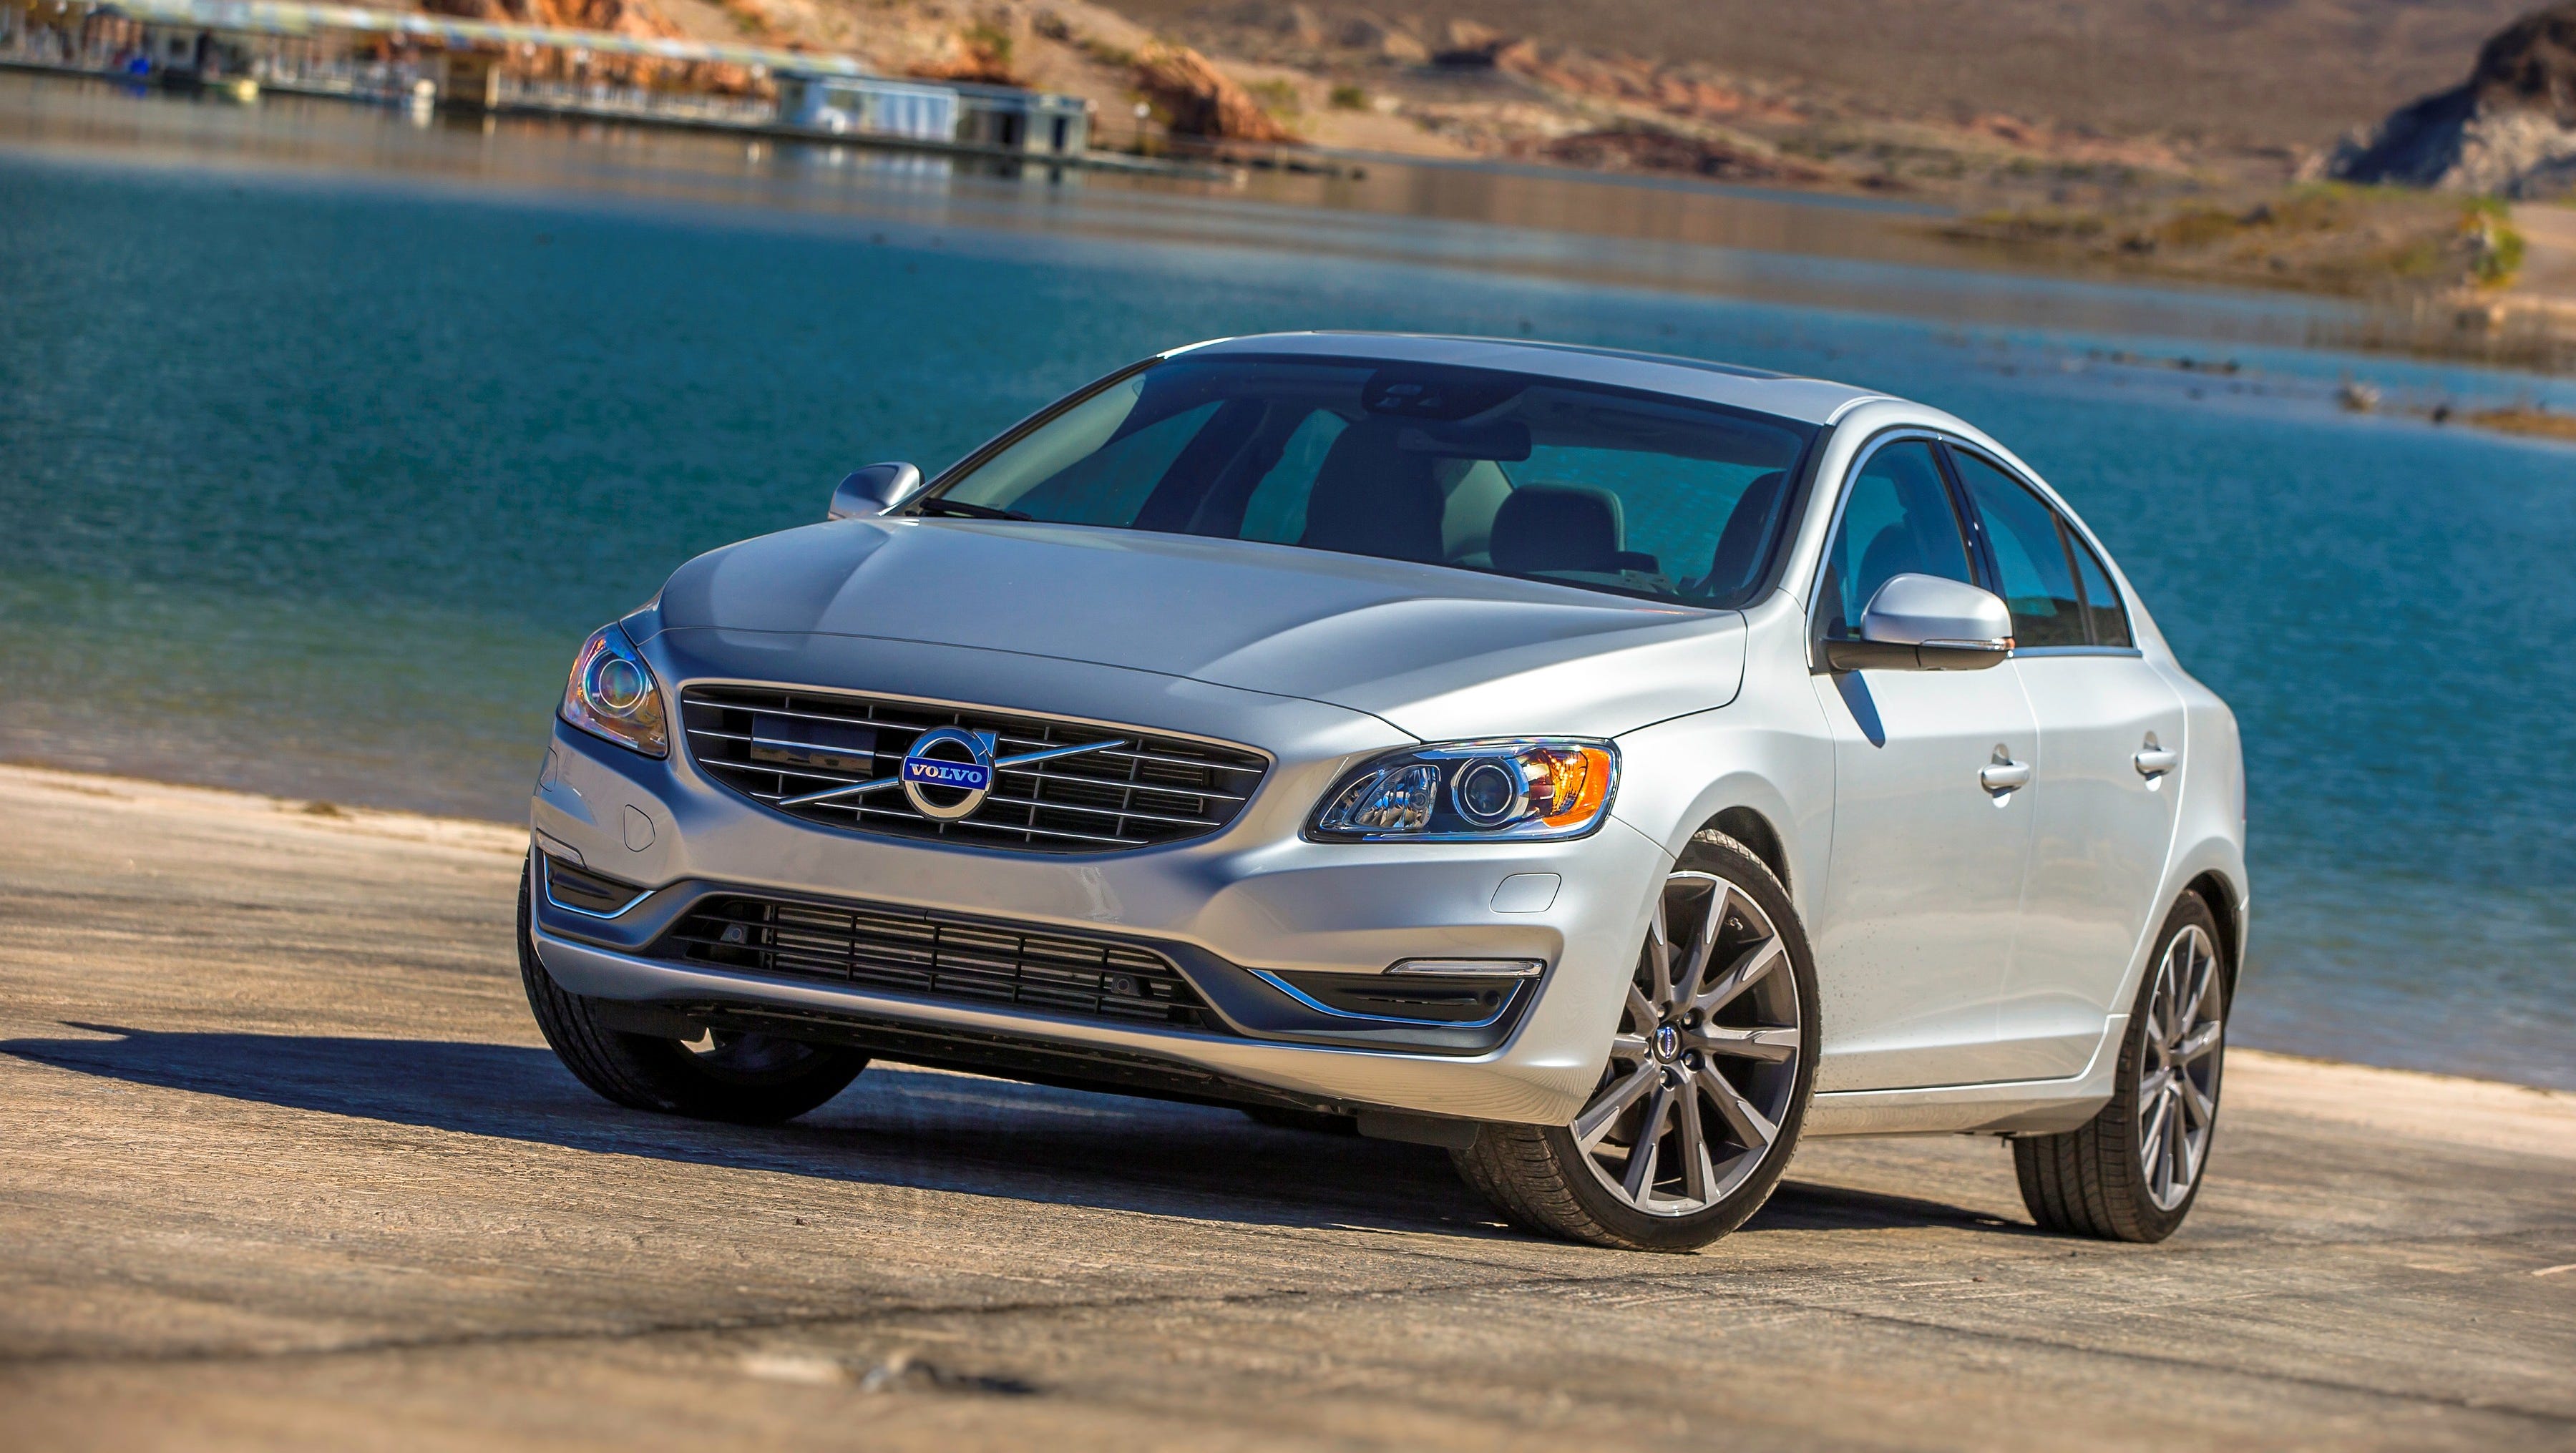 Auto review: 2015 Volvo S60 delivers improved performance, unquestioned  safety